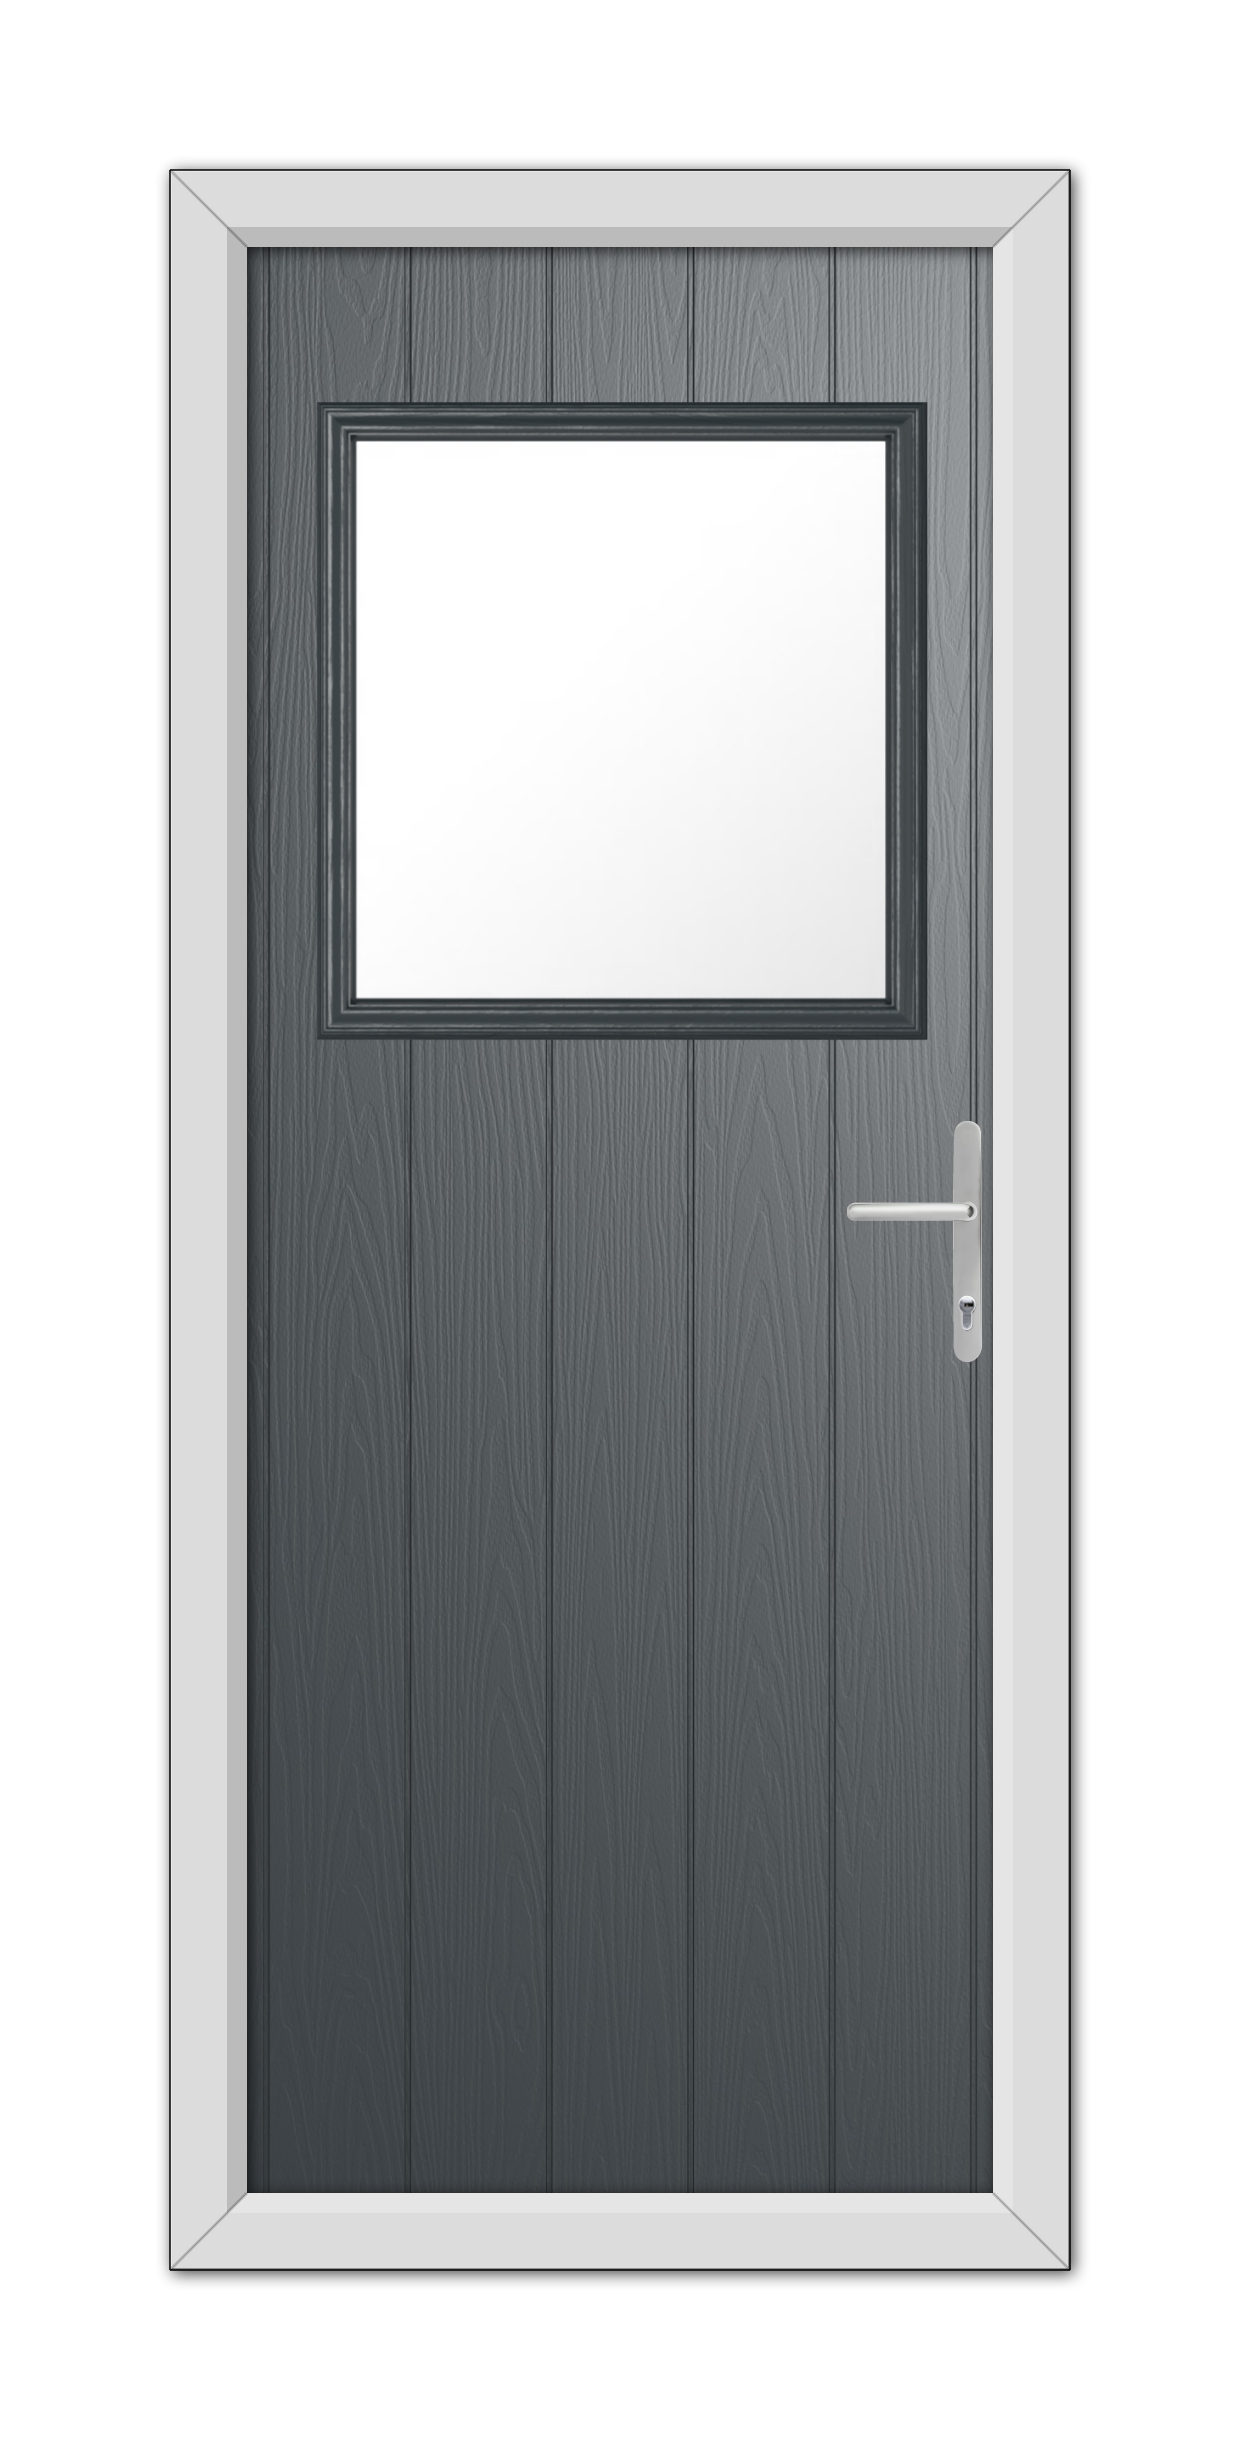 A modern anthracite grey Fife composite door with a rectangular window and a stainless steel handle, set within a white frame.